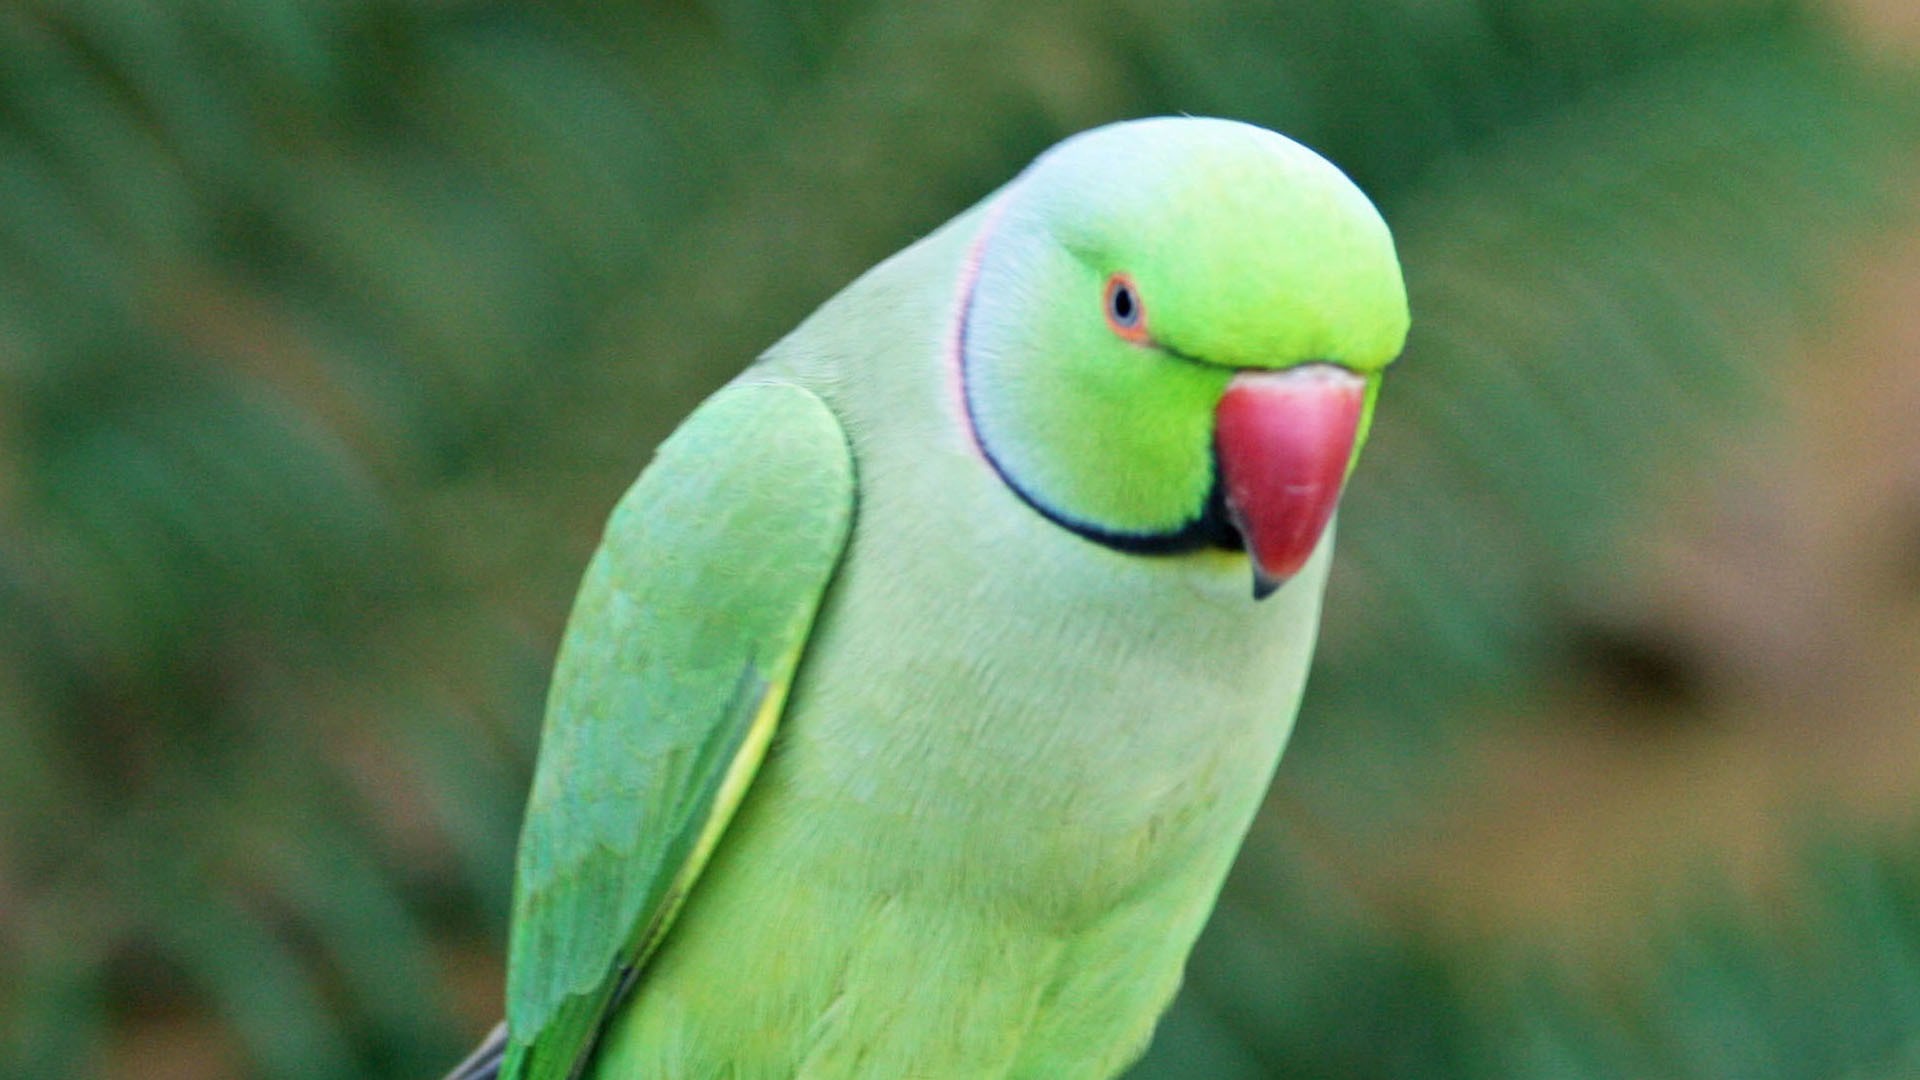 Cute Parrot Wallpapers